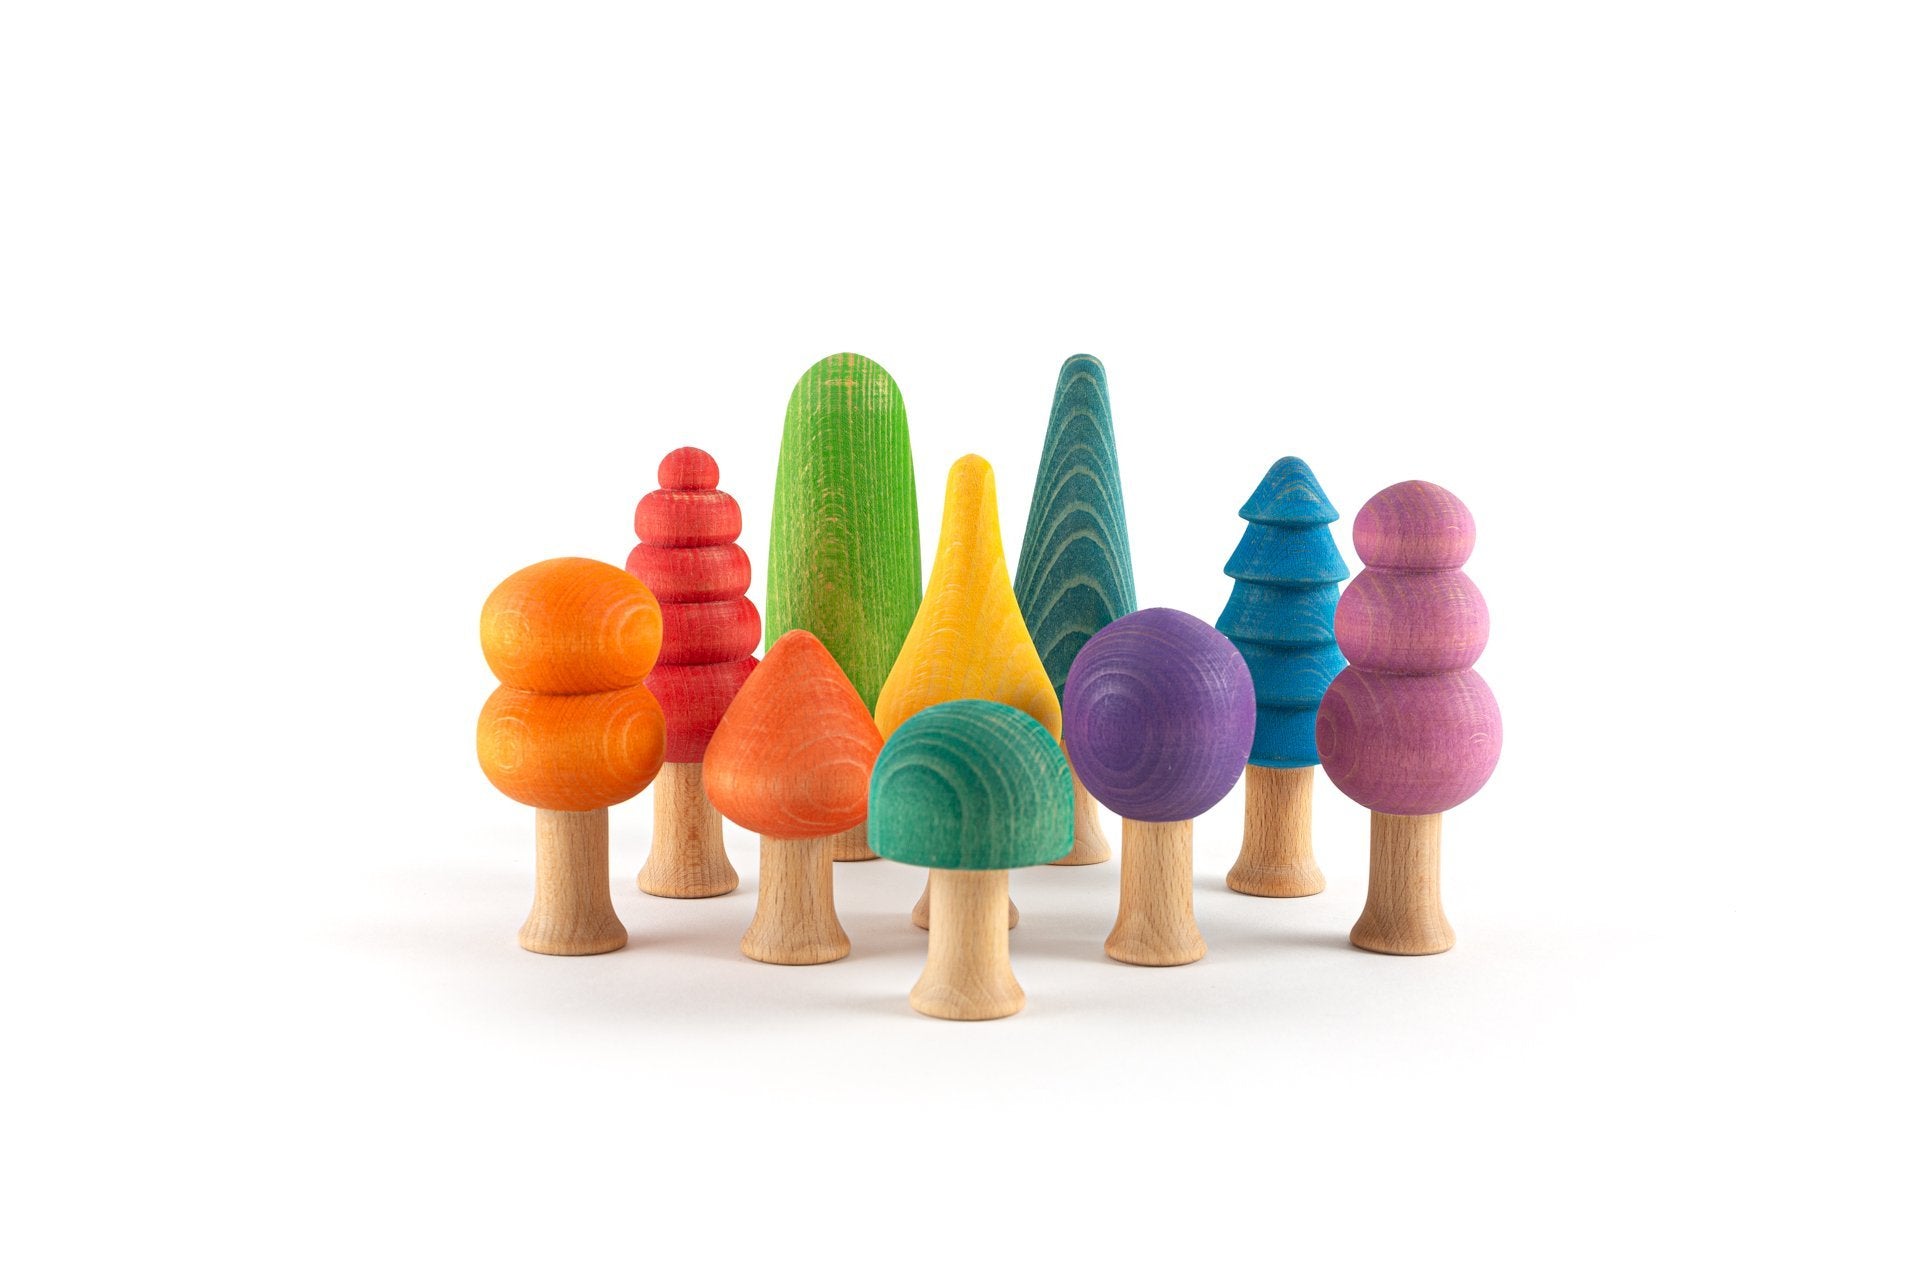 Ocamora Bosque Arcoiris Forest Set (10 Pieces) - Wood Wood Toys Canada's Favourite Montessori Toy Store